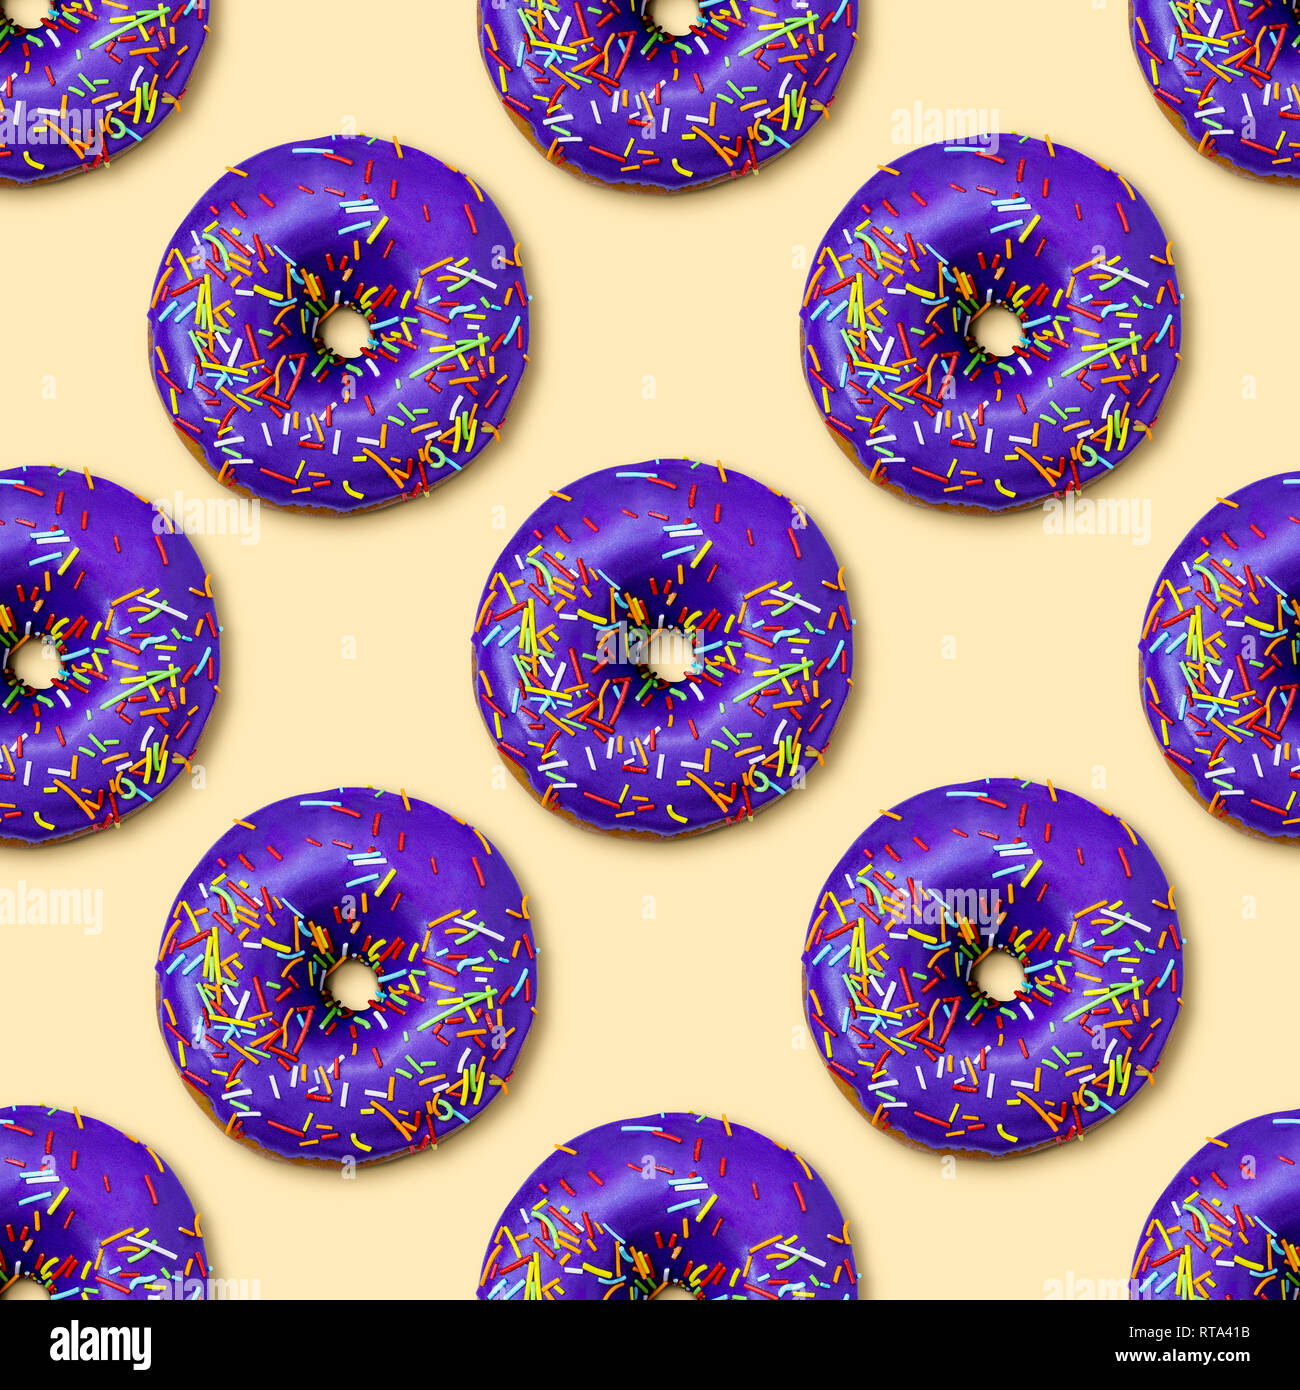 Bright flat seamless pattern with donuts. Violet glazed donuts with colorful sugar sprinkles on yellow background. Fashion minimalism style. Top view Stock Photo